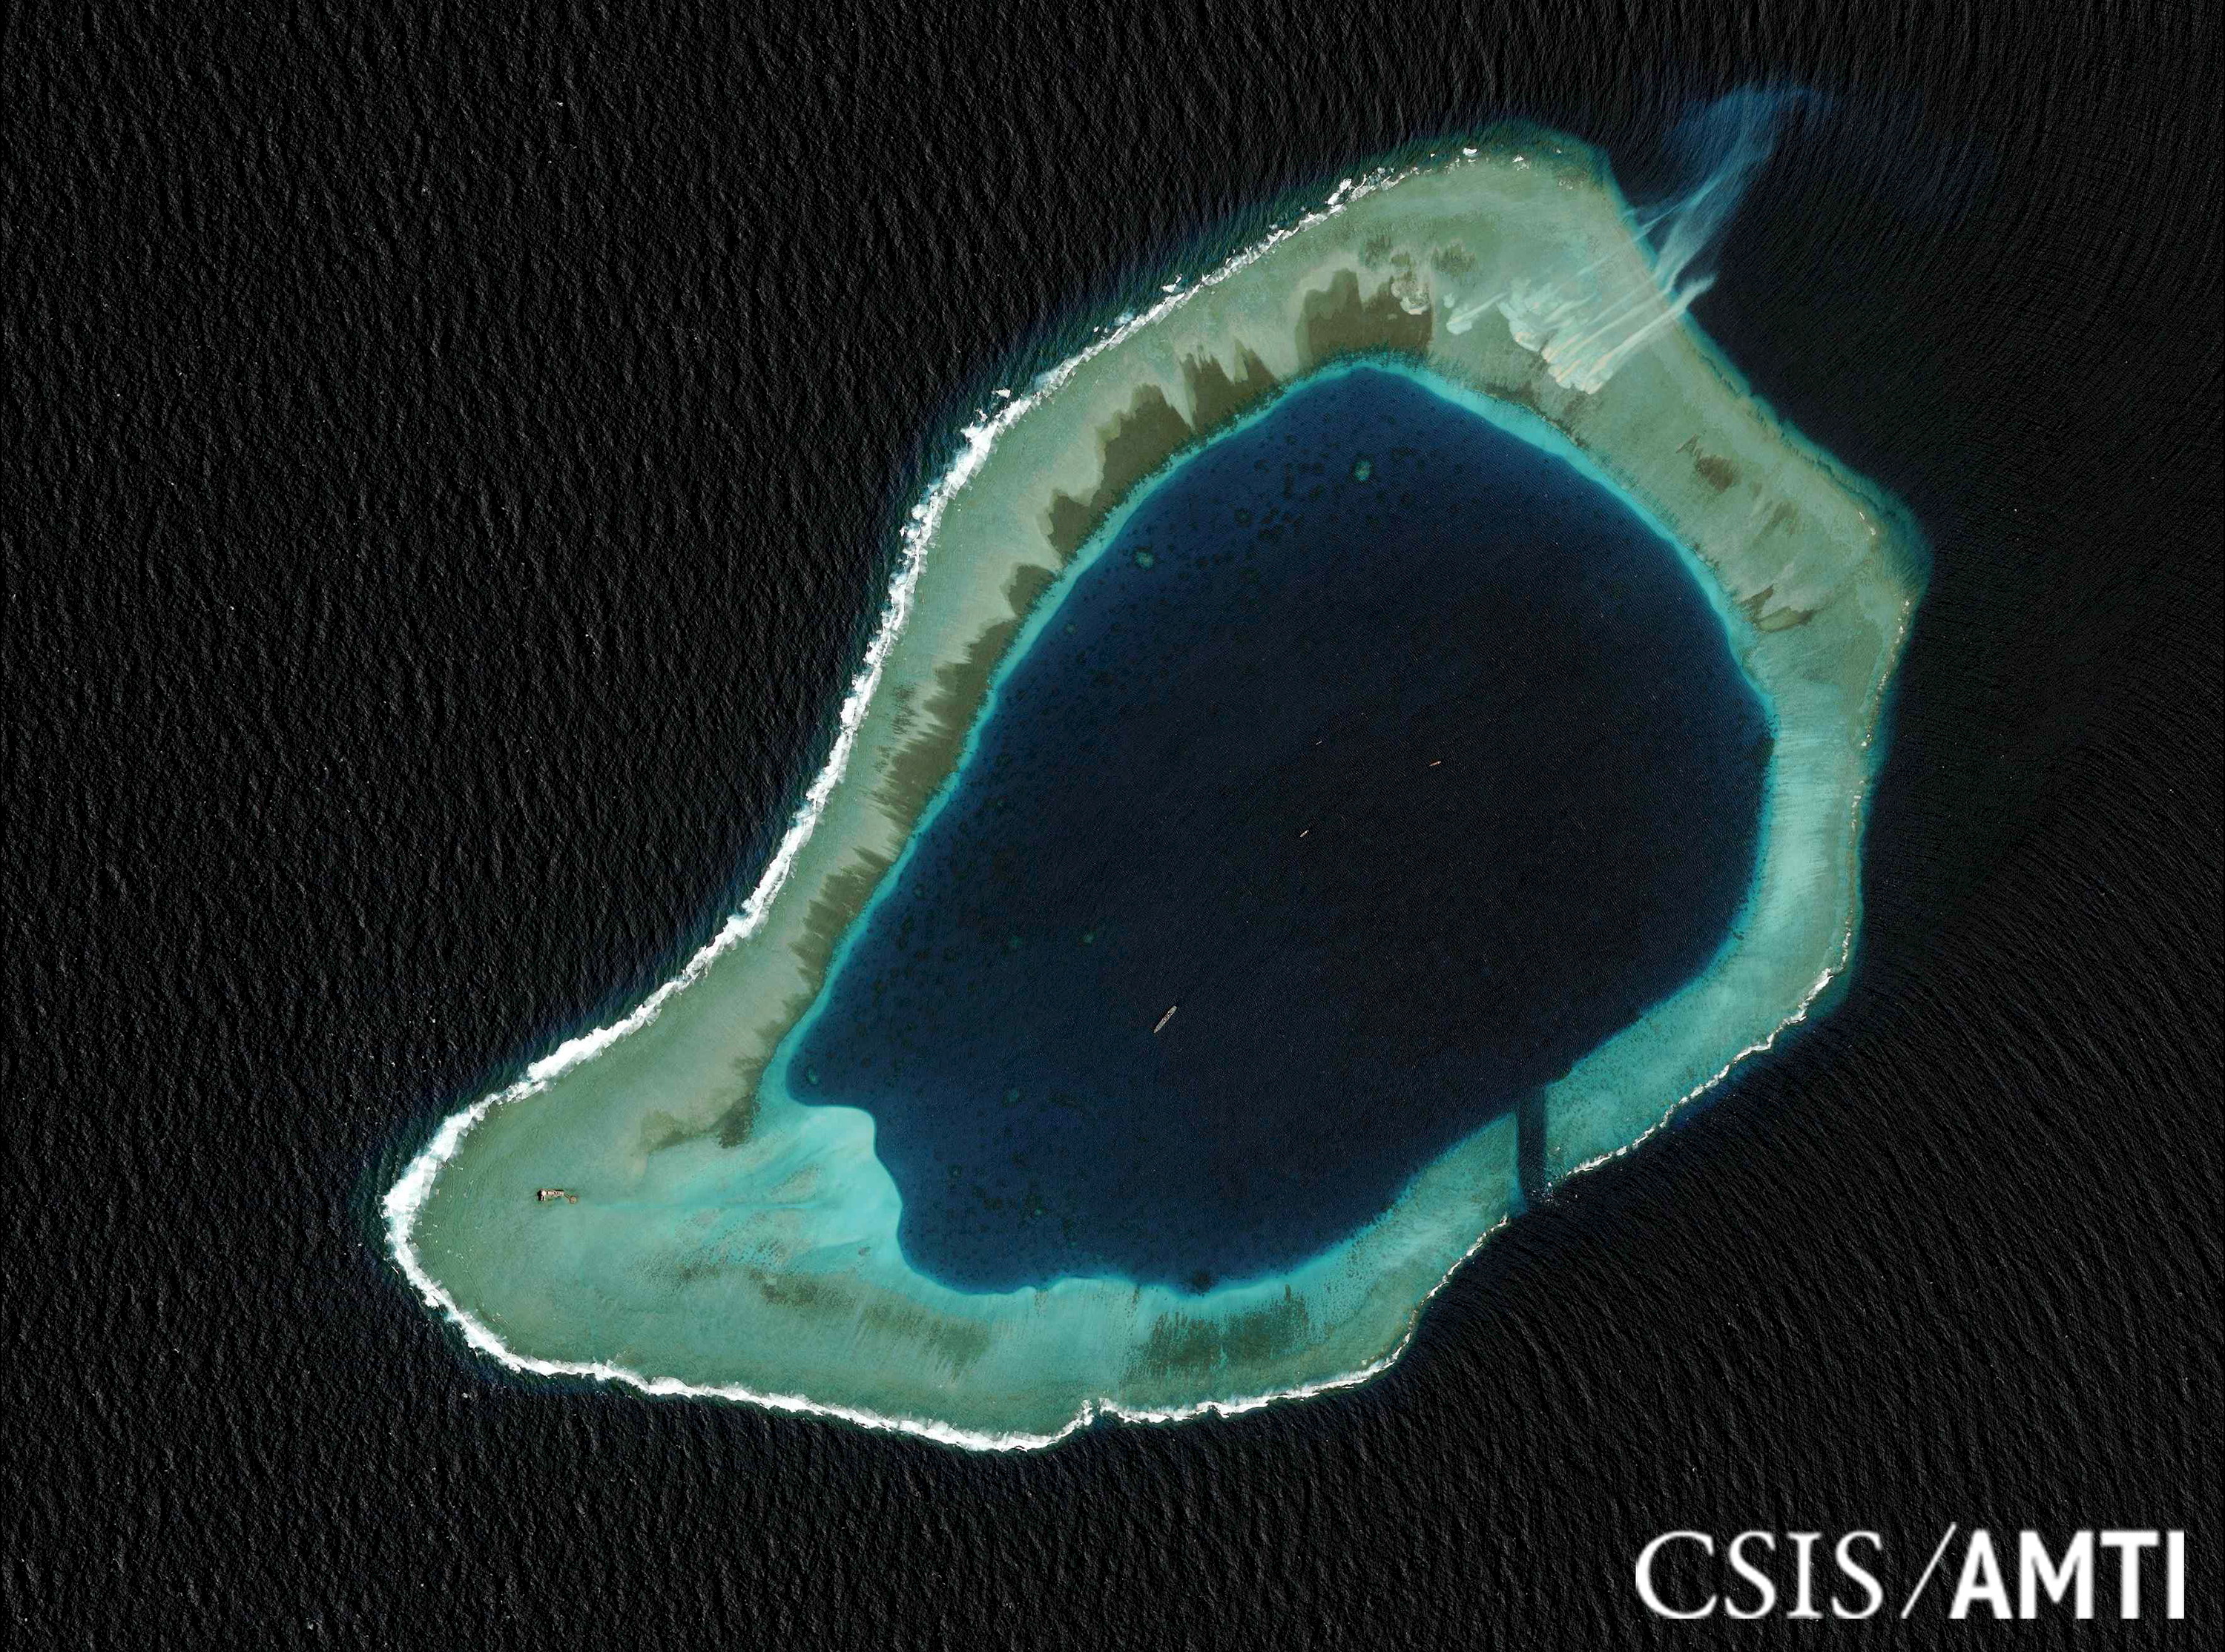 Subi reef, located in the disputed Spratly Islands in the South China Sea, is shown in this file handout CSIS Asia Maritime Transparency Initiative satellite image